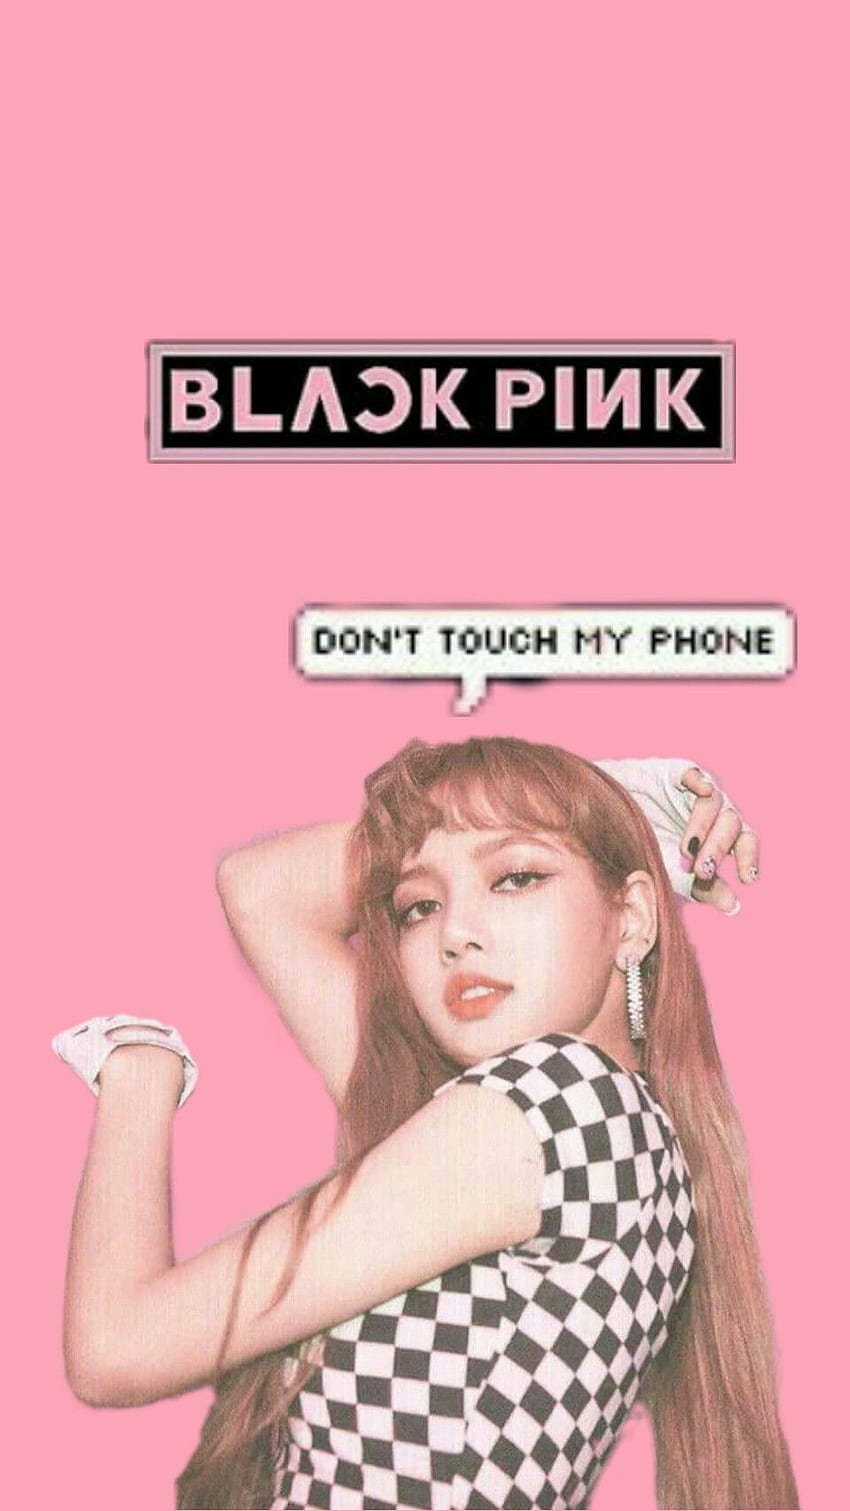 Don't touch my phone blackpink. Women fashion in 2019, Blackpink Cute ...